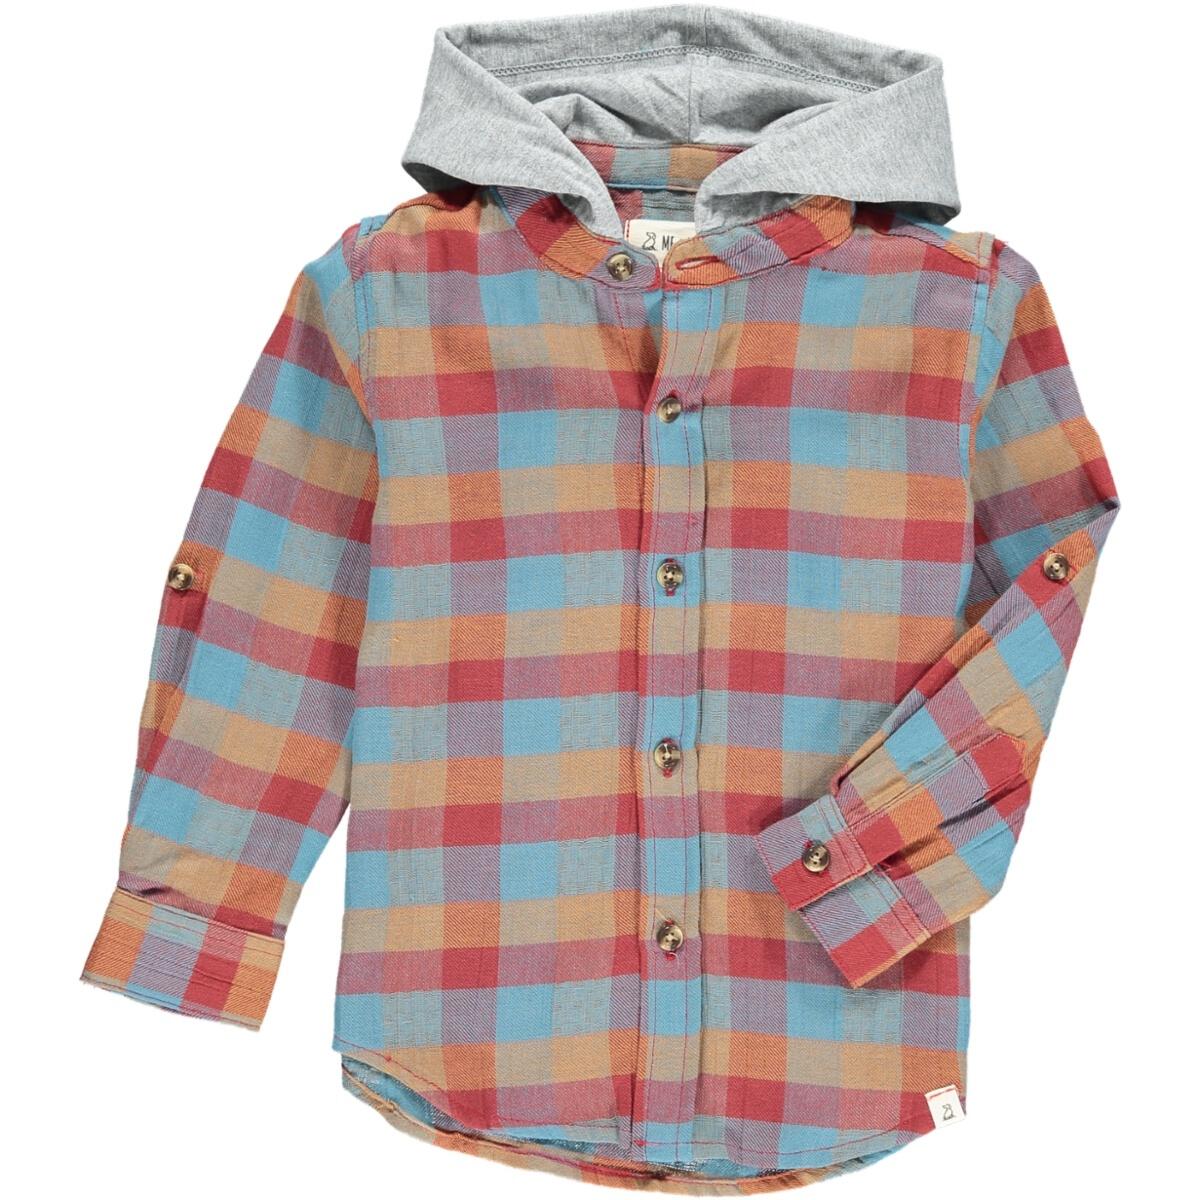 Dyer Hooded Shirt - Red/Blue Plaid